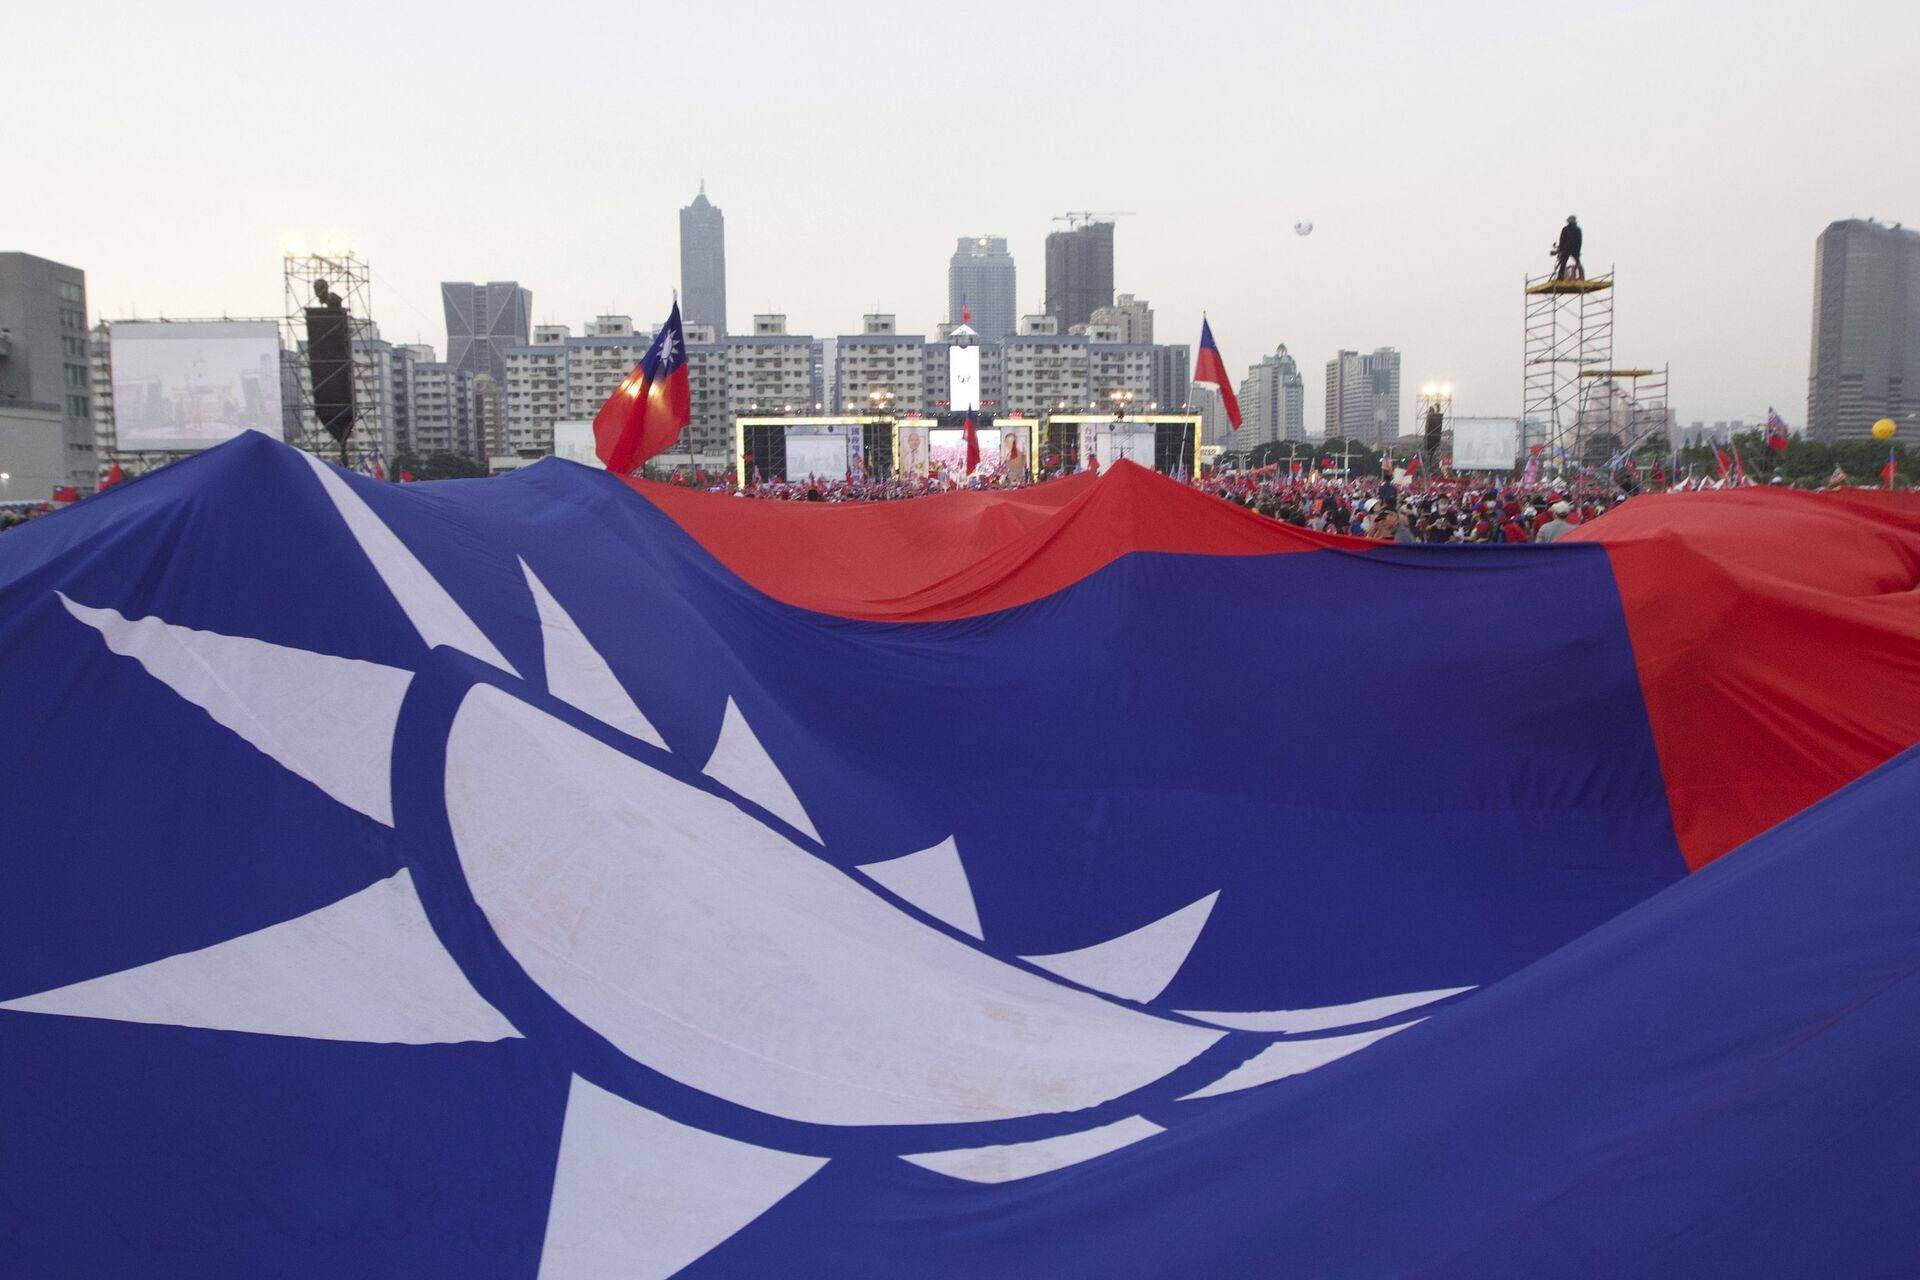 Supporters of Taiwan's 2020 presidential election candidate for the KMT, or Nationalist Party, Han Kuo-yu pass along a giant Taiwanese flag for the start of a campaign rally in southern Taiwan's Kaohsiung city on Friday, Jan 10, 2020 - Sputnik International, 1920, 04.11.2021